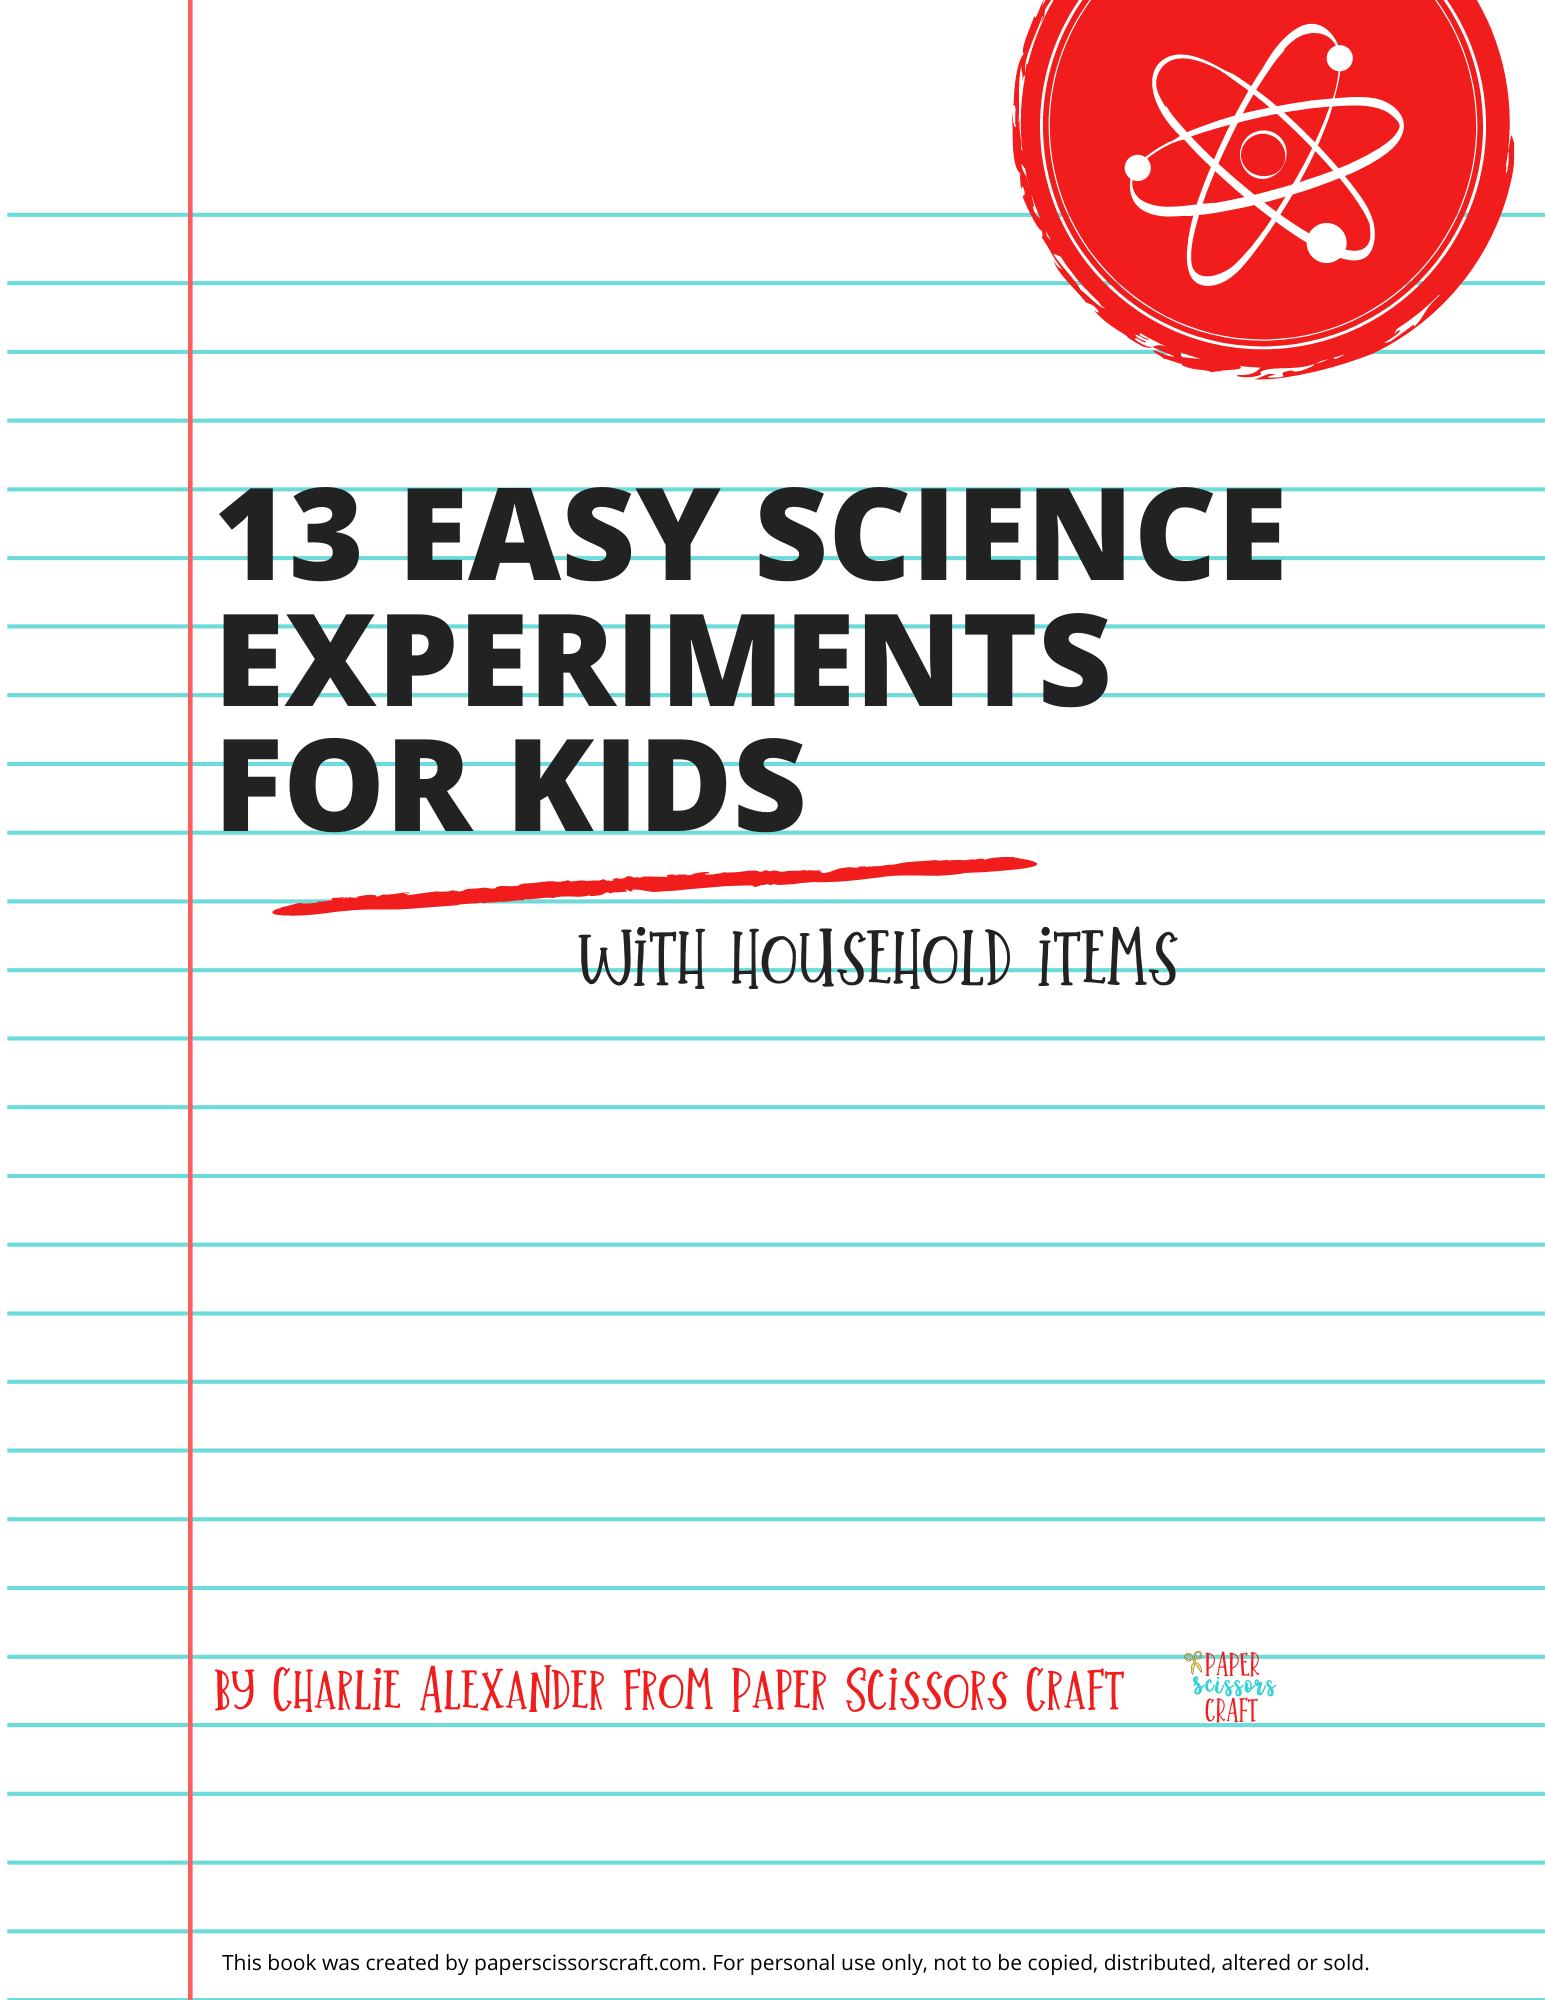 13 Easy Science Experiments for Kids with Household Items (4)-min